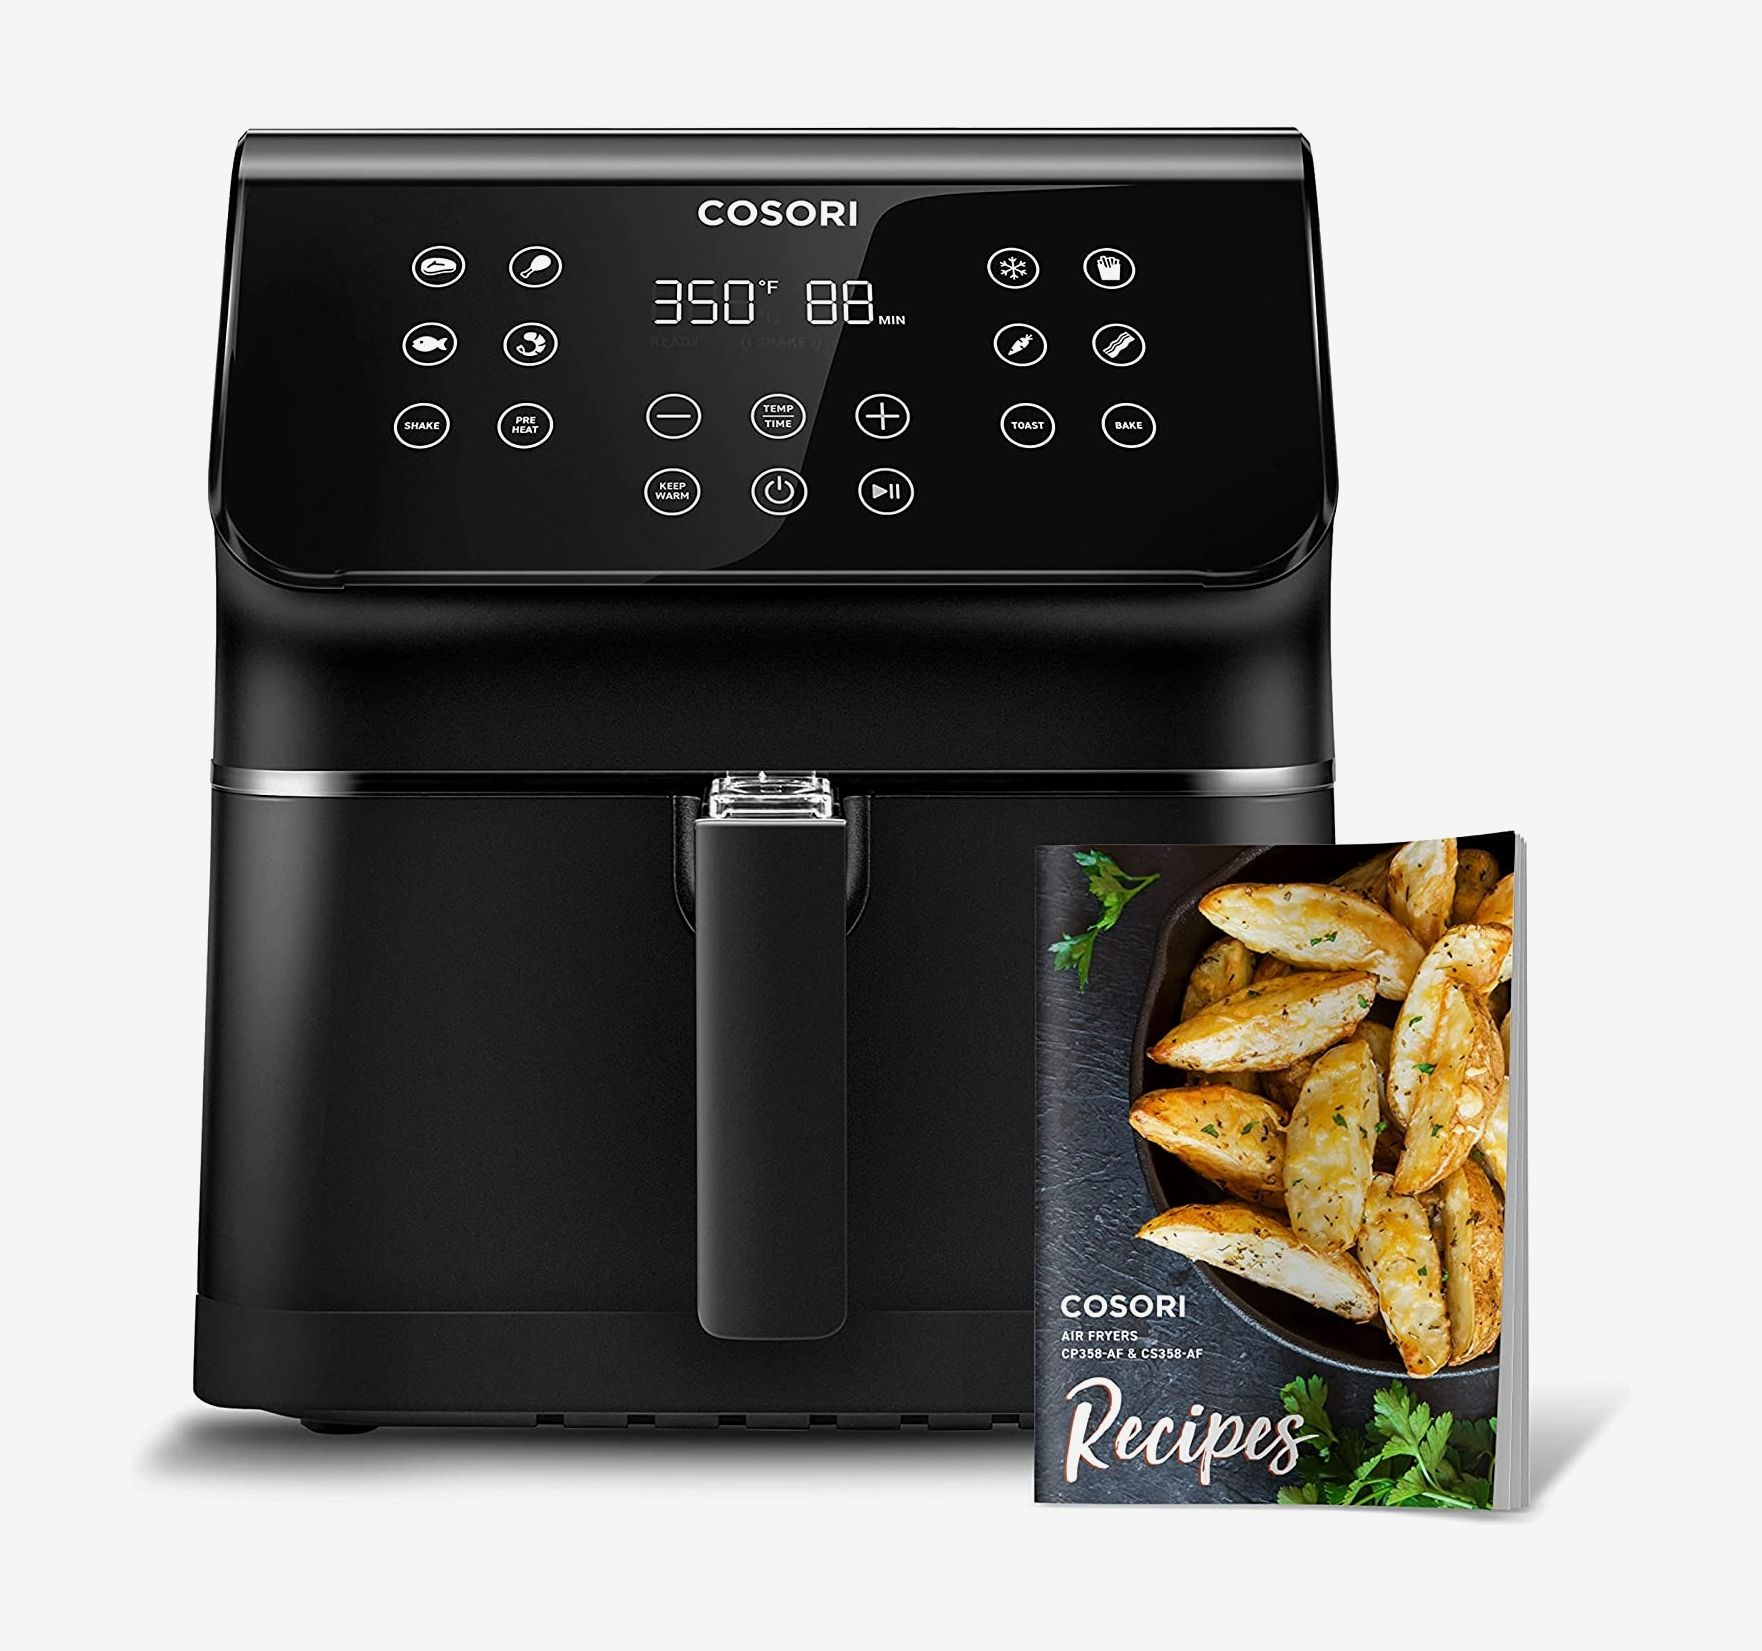 Finally in the Market for an Air Fryer? These are the 7 Best to Buy